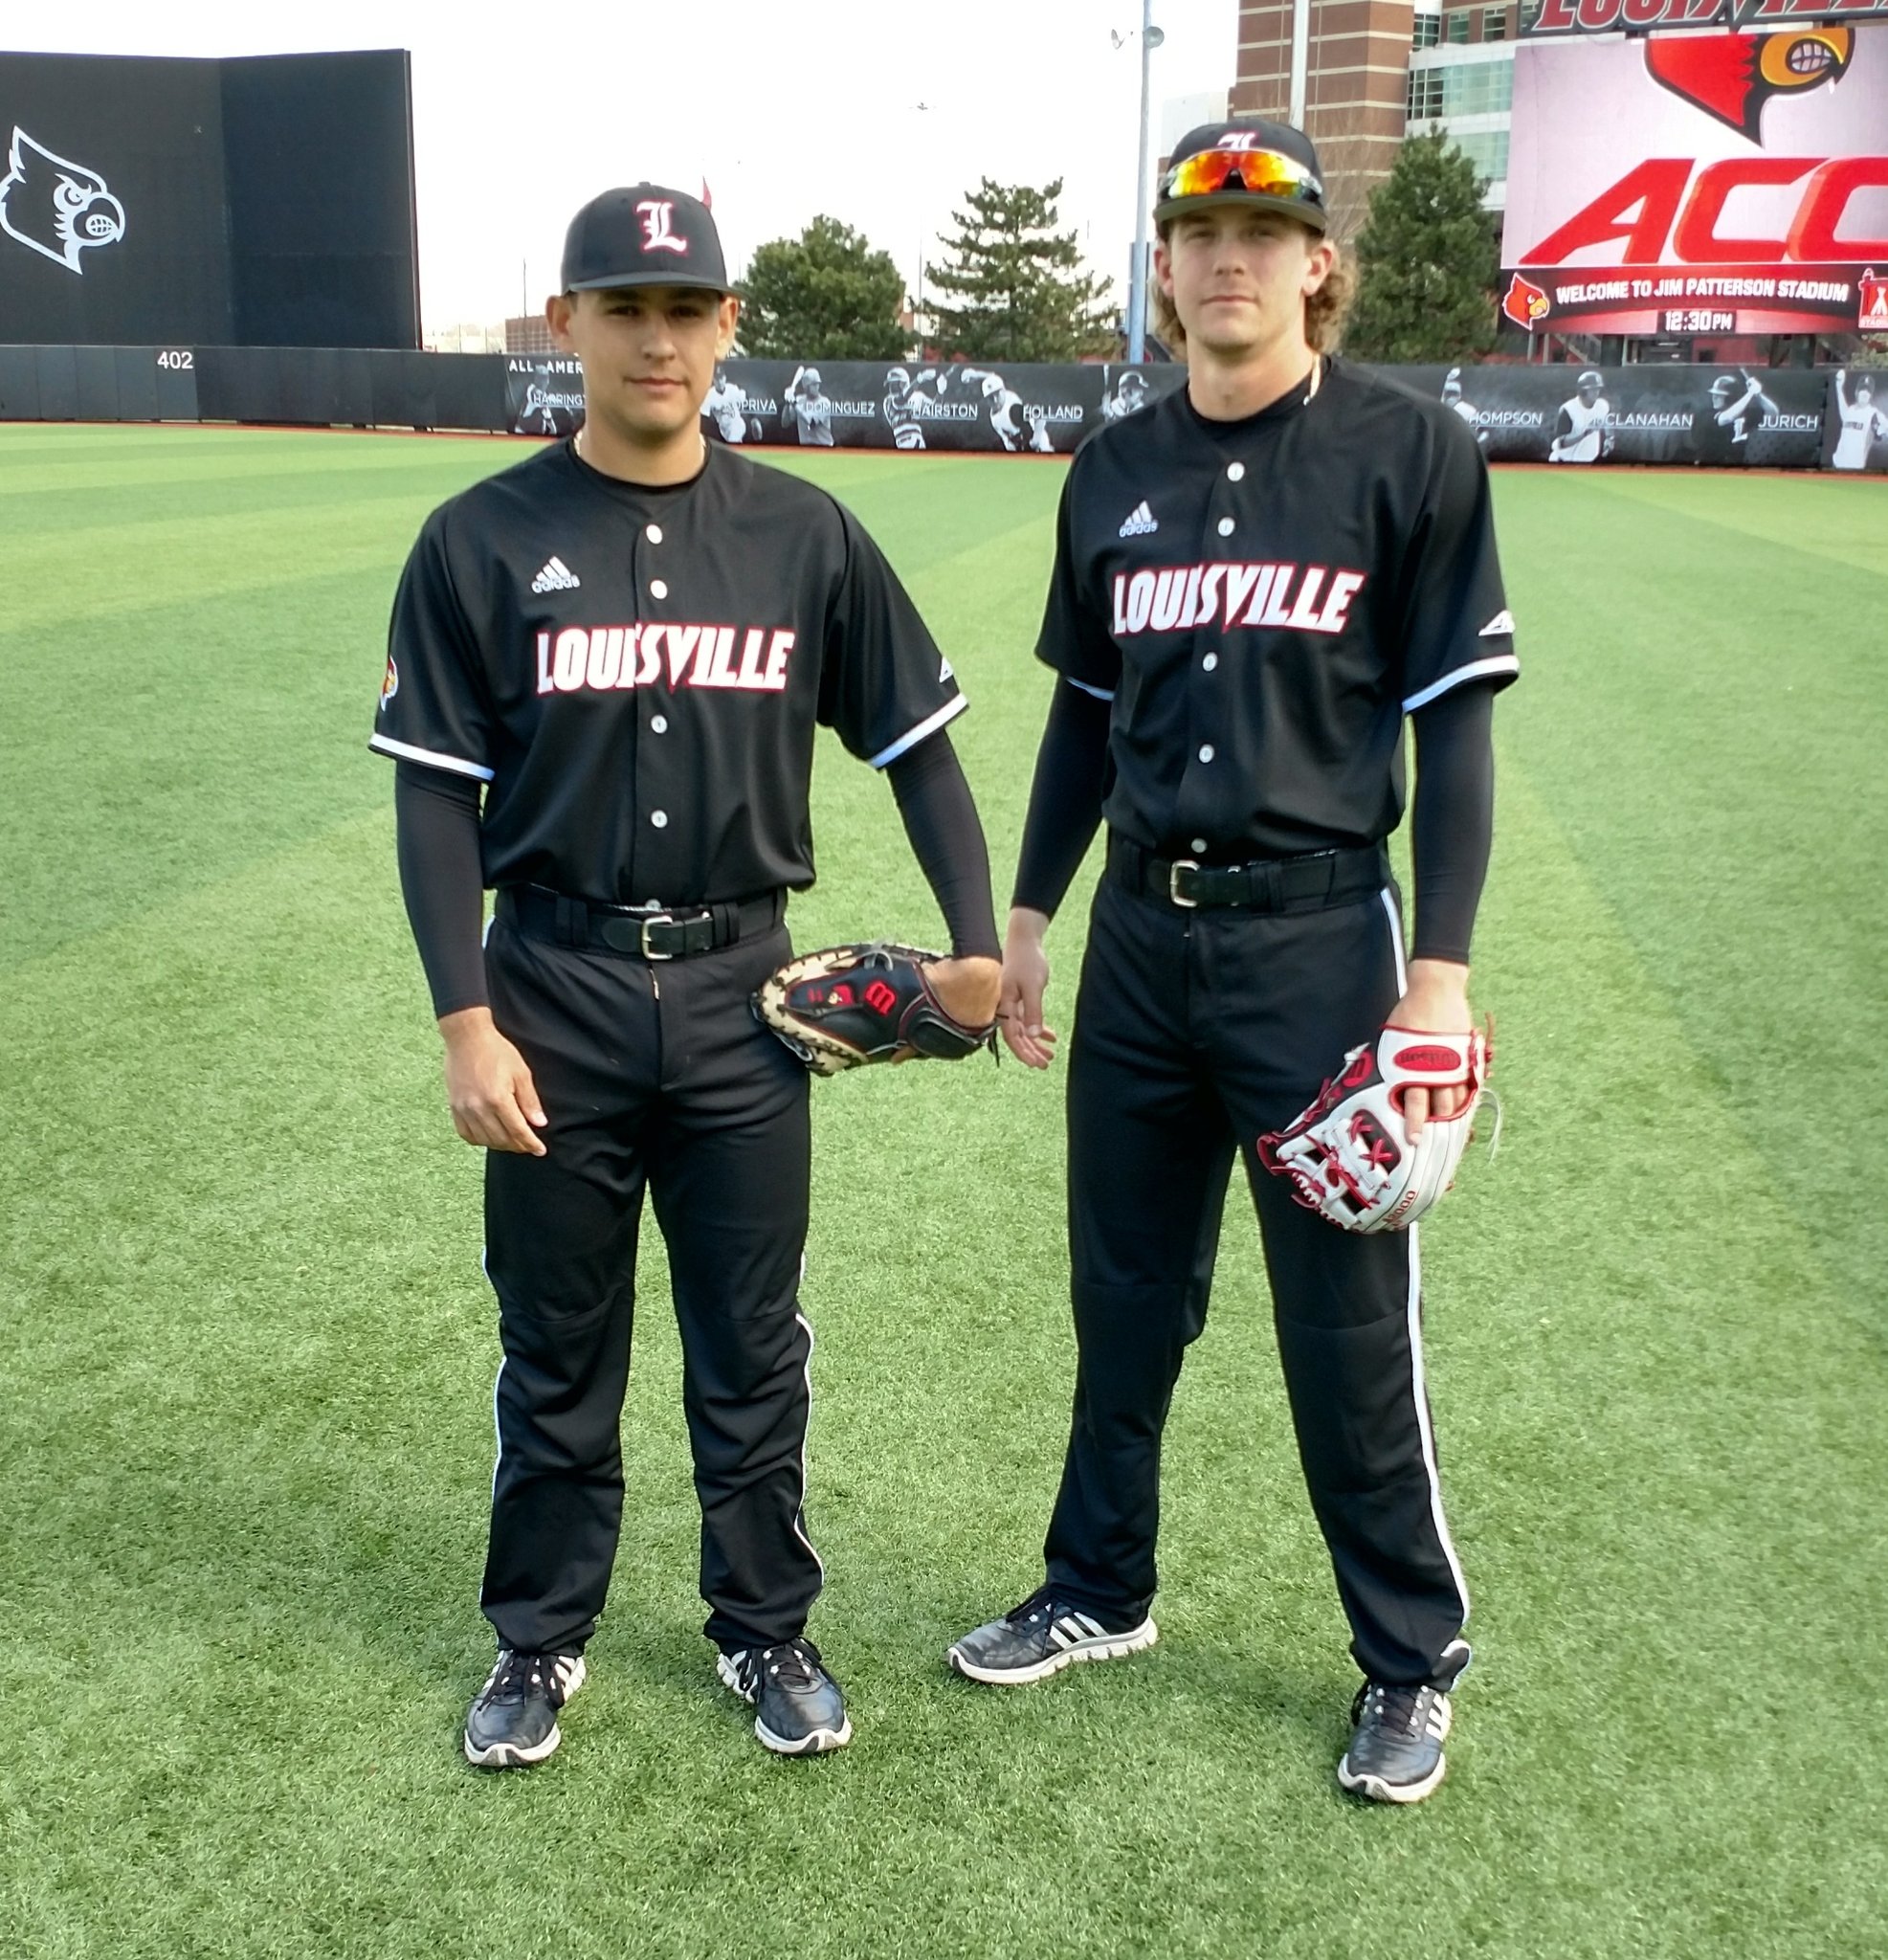 Louisville Baseball on X: Happy Black Friday! The No. 4 Cardinals open  @ACCBaseball action today at 4 pm at Patterson Stadium against Pittsburgh.  #L1C4  / X